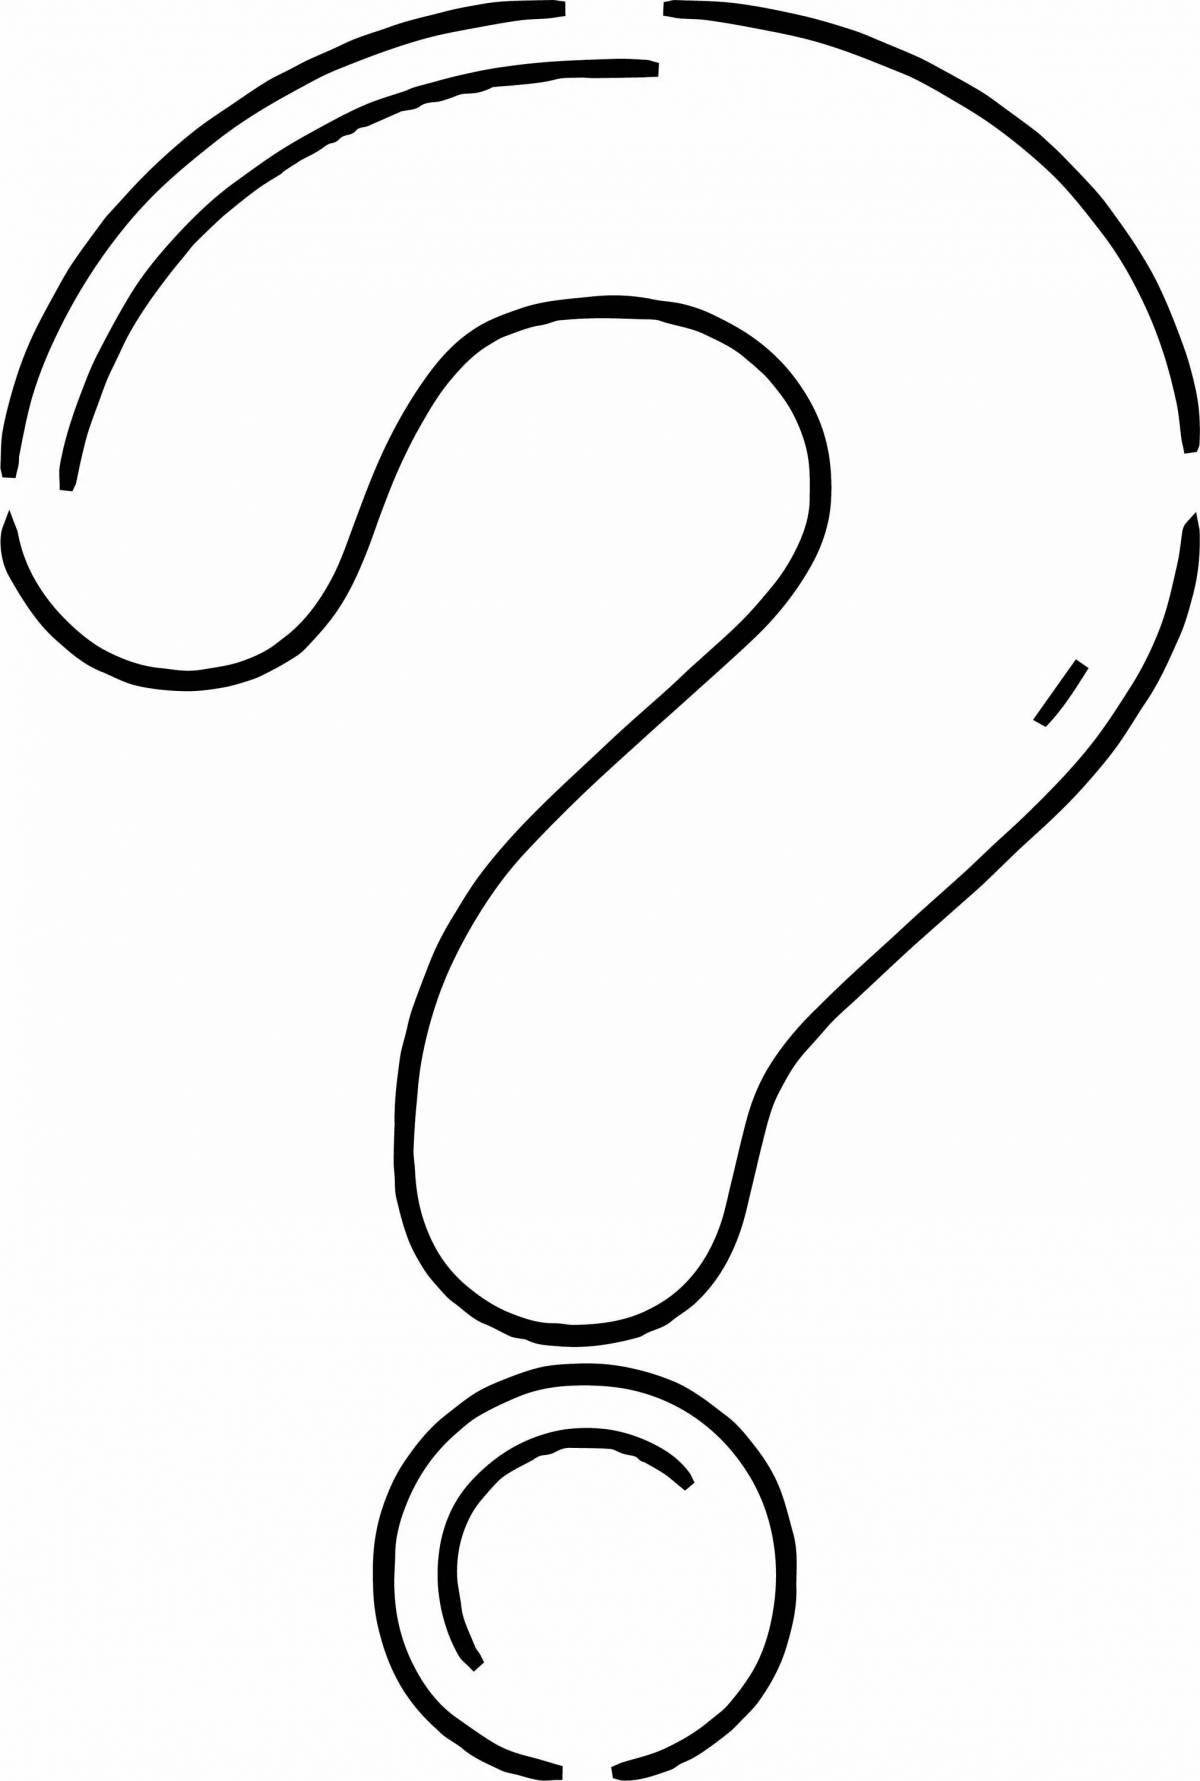 Attractive coloring page with question mark